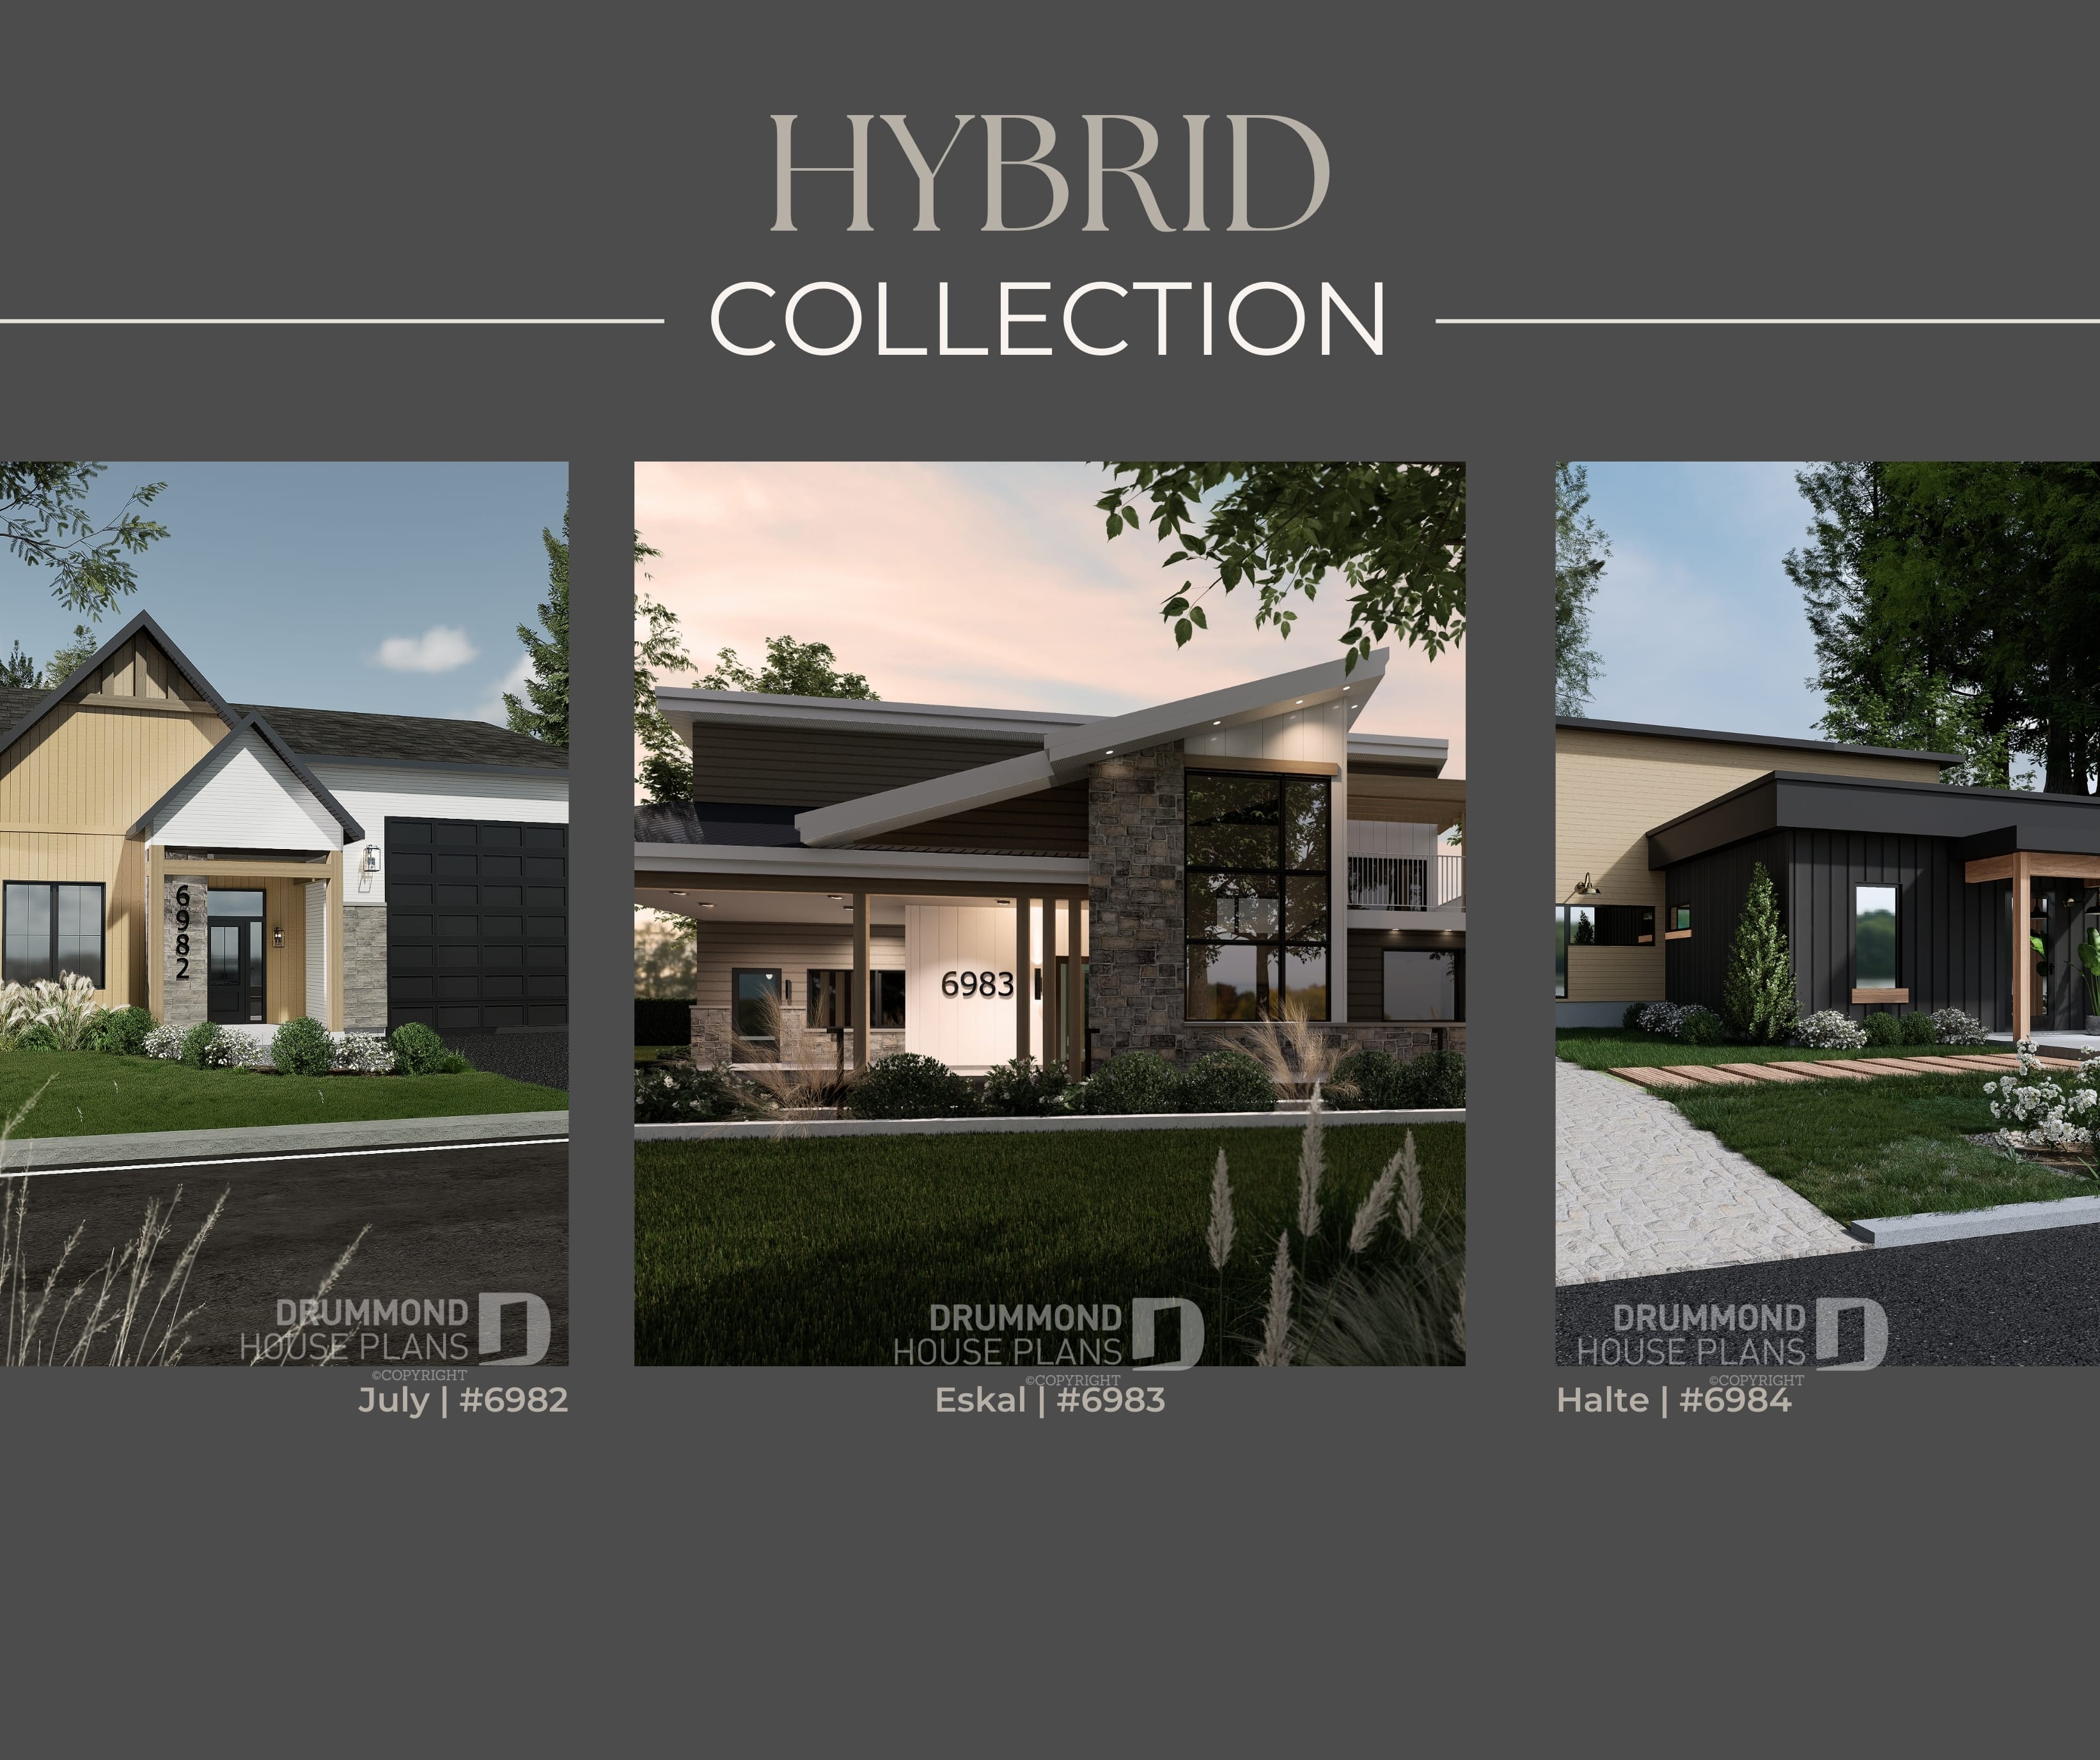 1 - Hybrid collection